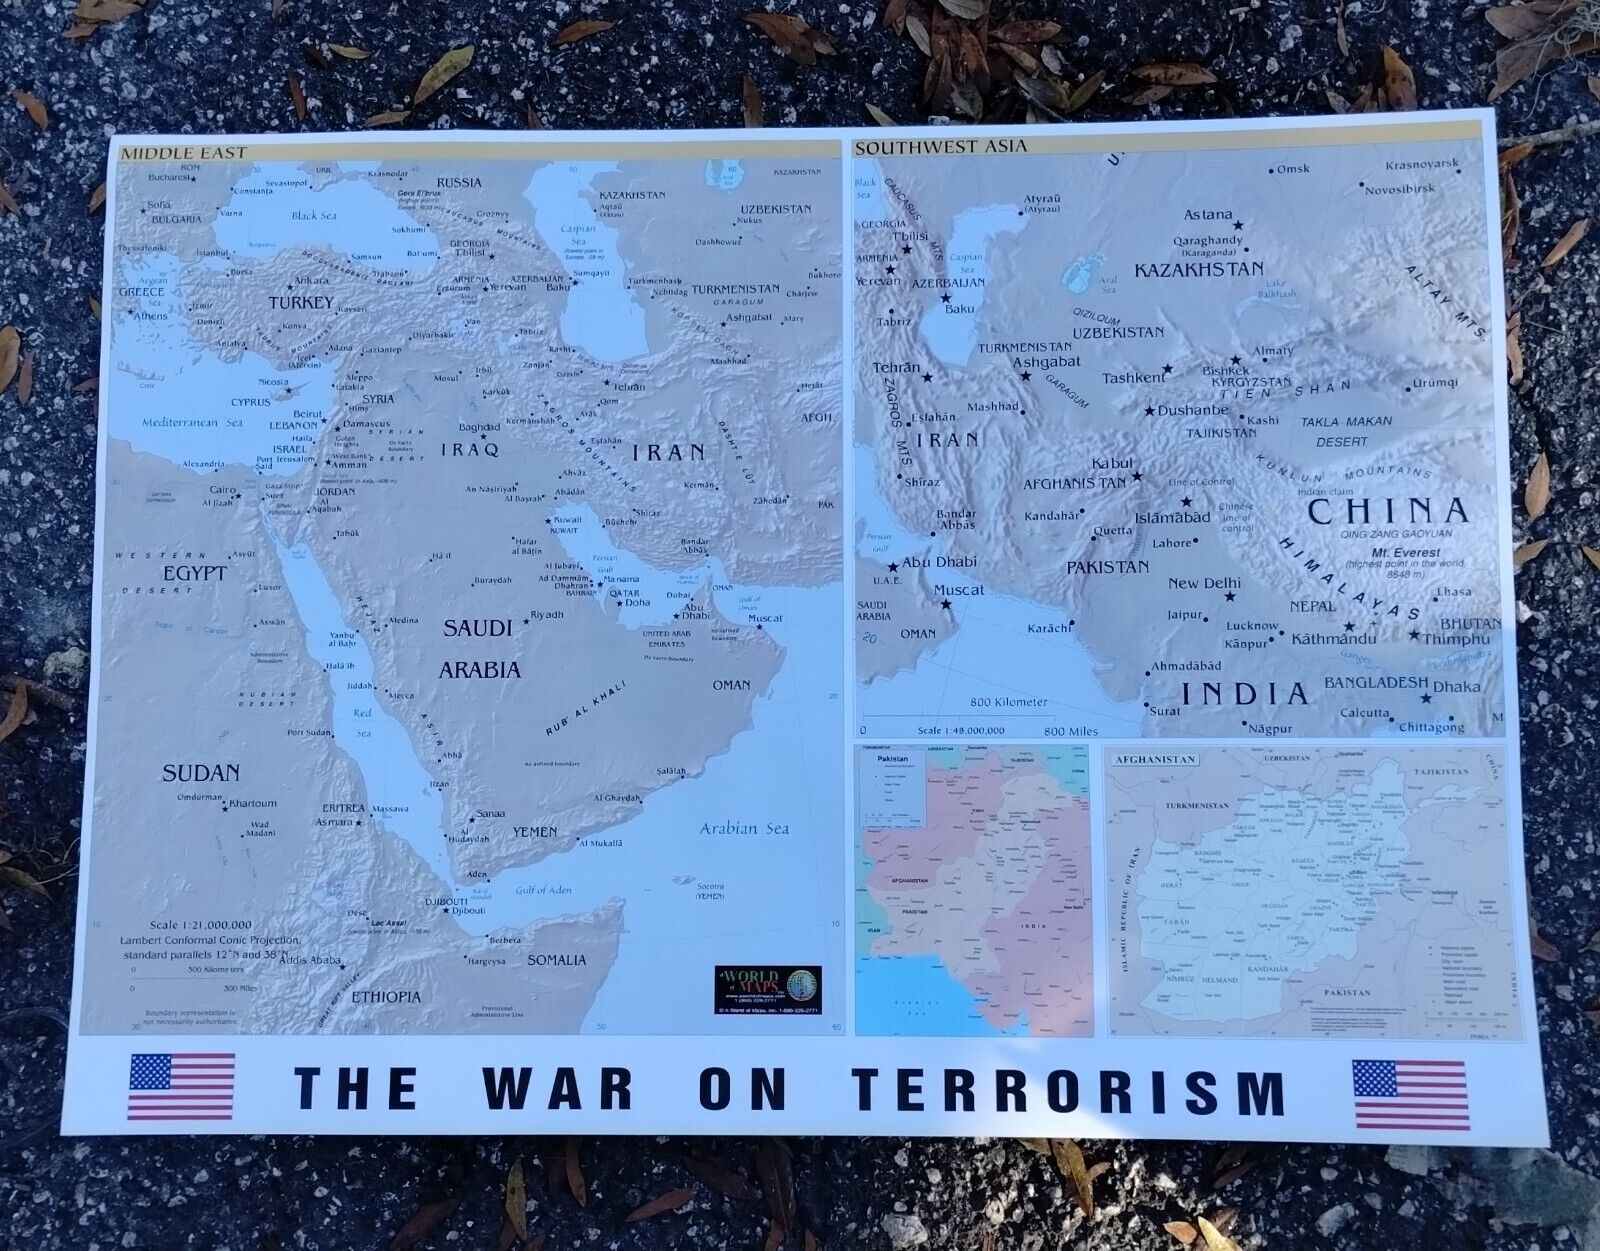 Global War On Terrorism Maps (Original 2001 Maps) Used By Allied Armed Forces